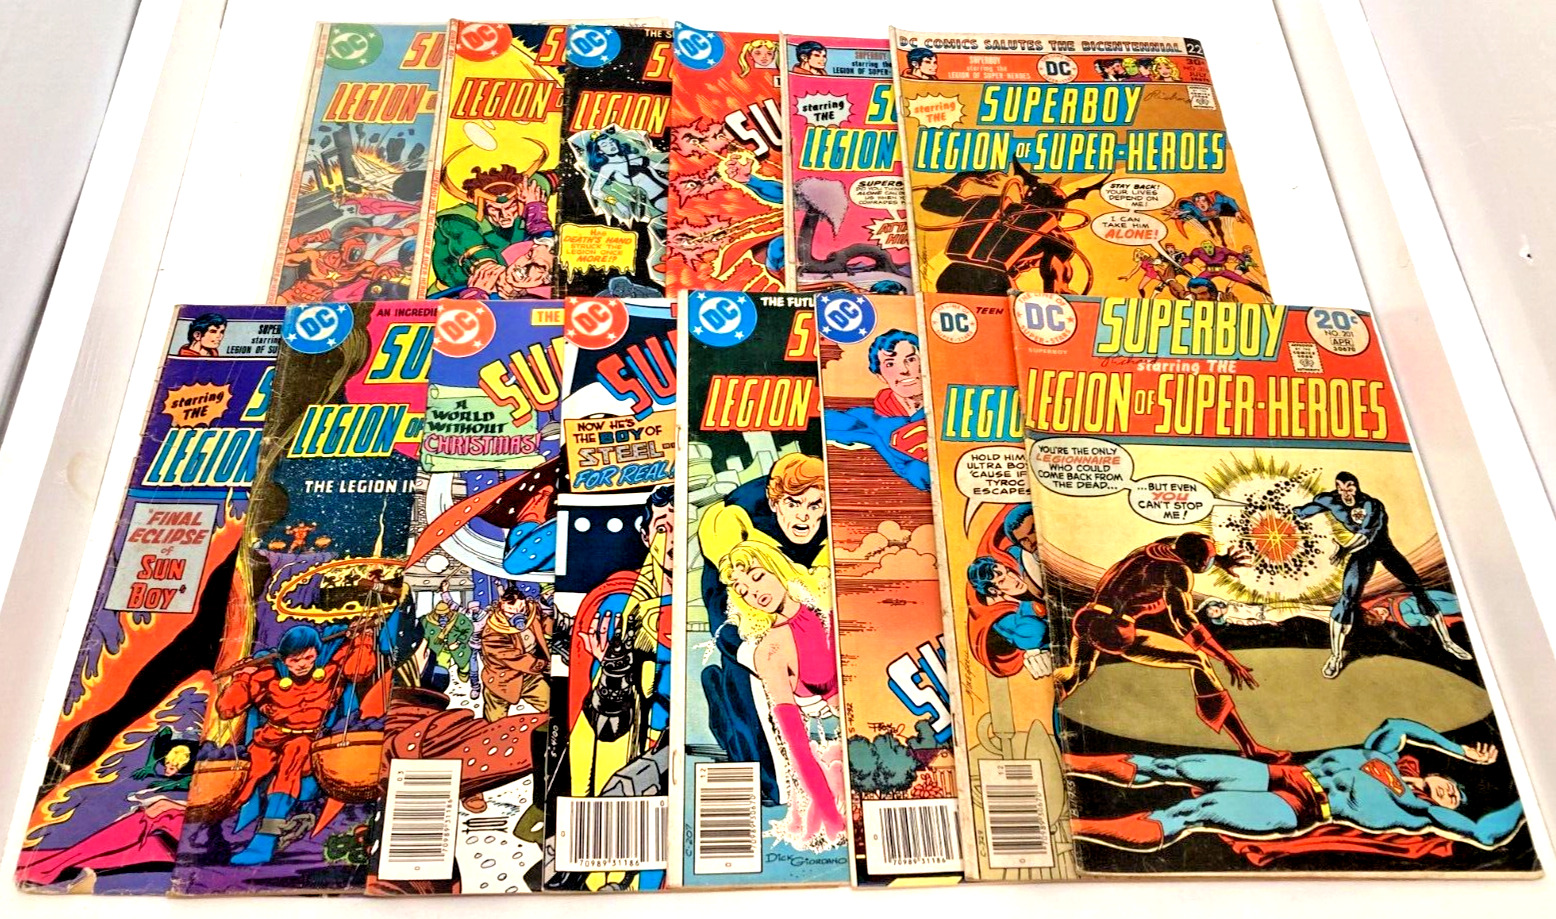 Superboy and the Legion of Super-Heroes/New Adventures assorted lot #36-258